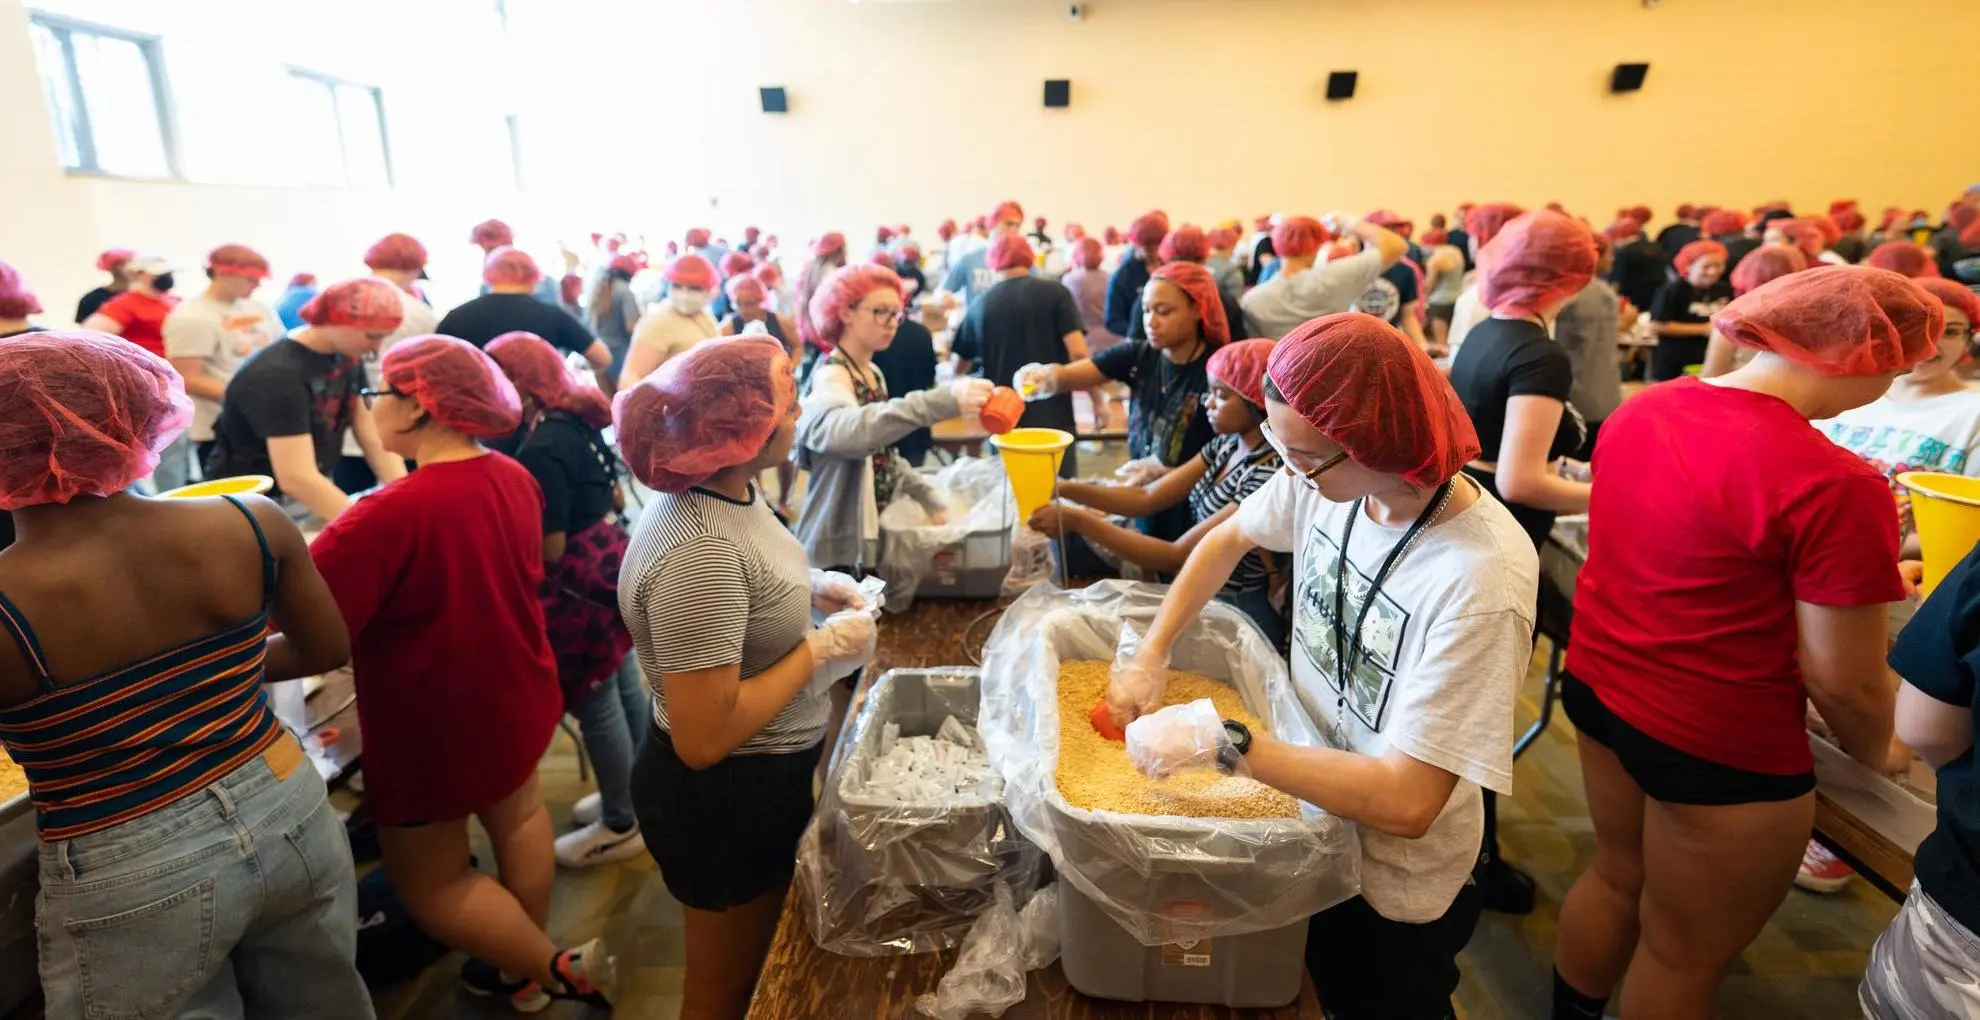 Arcadia students volunteer in a crowded kitchen for rise against hunger.